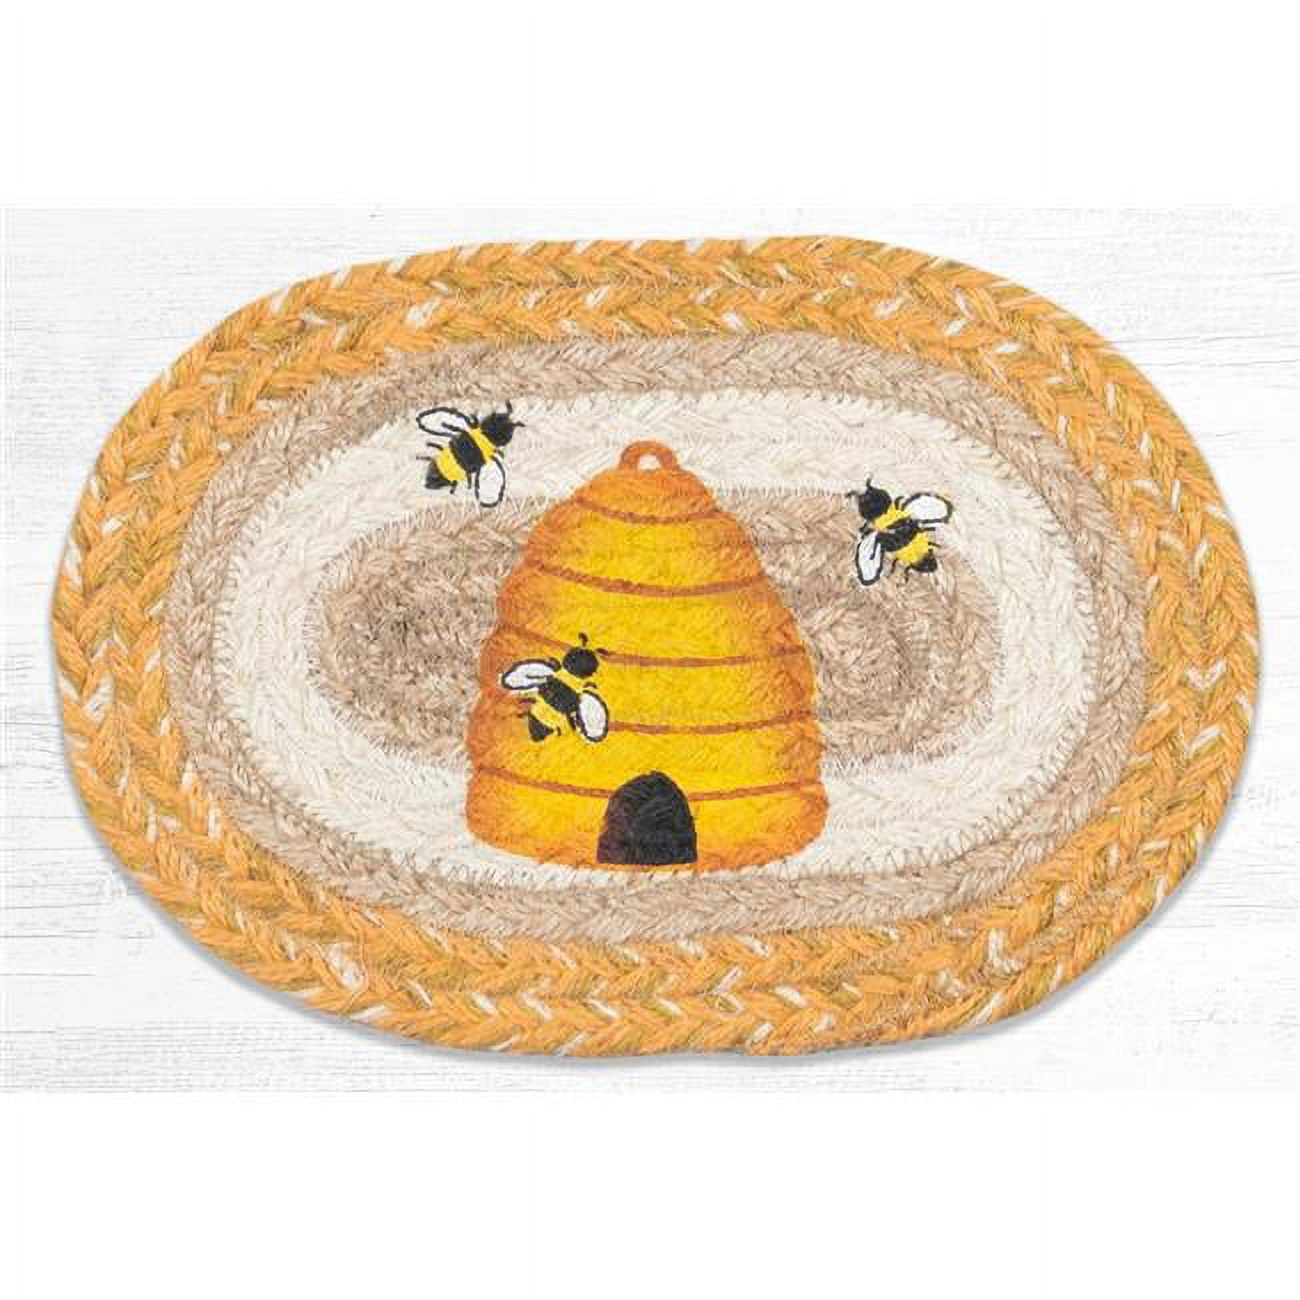 Picture of Capitol Importing 01-9-101BH 7.5 x 11 in. OMSP-9-101 Beehive Printed Oval Swatch